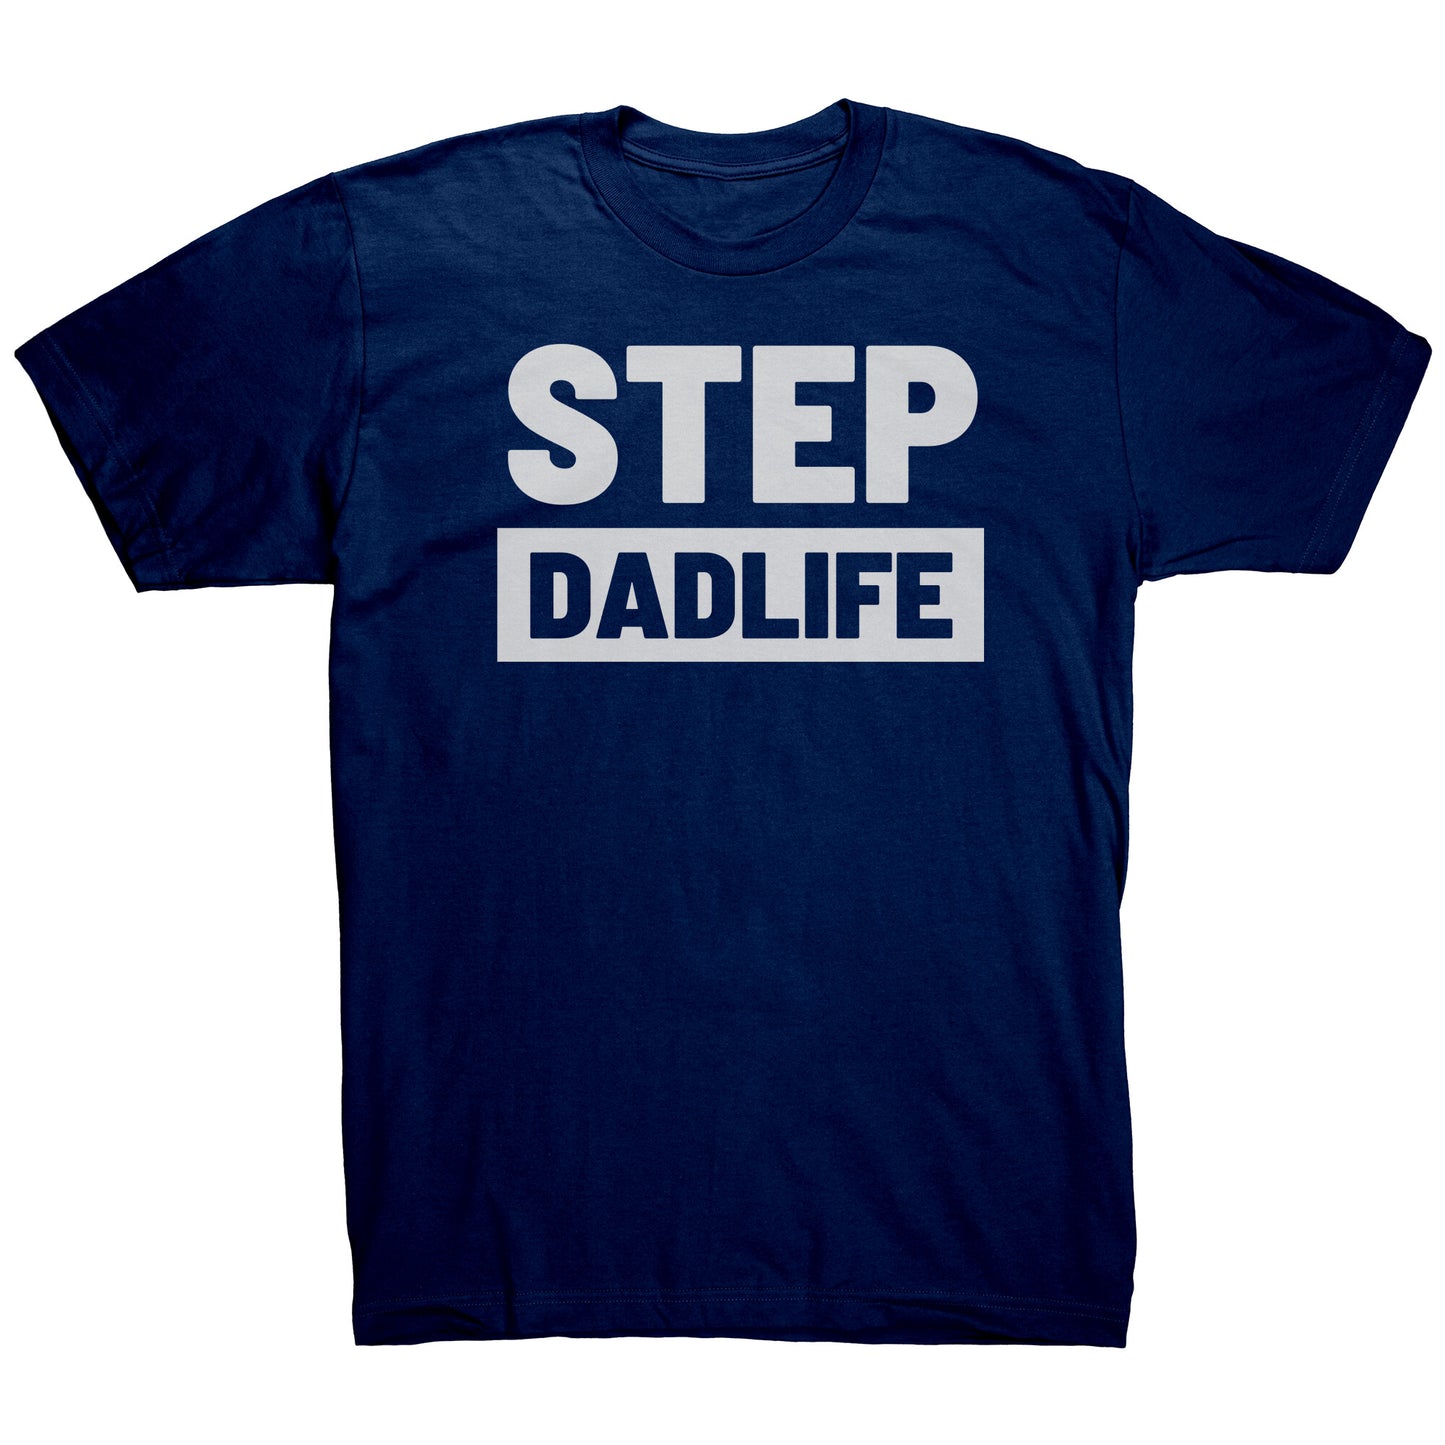 Dad Life Adult Shirt Black or Grey TShirt Dad T-Shirt Daddy Father Phrase Top Stylish Dad Gift Father's Day #DADLIFE Dadlife Gifts for Men